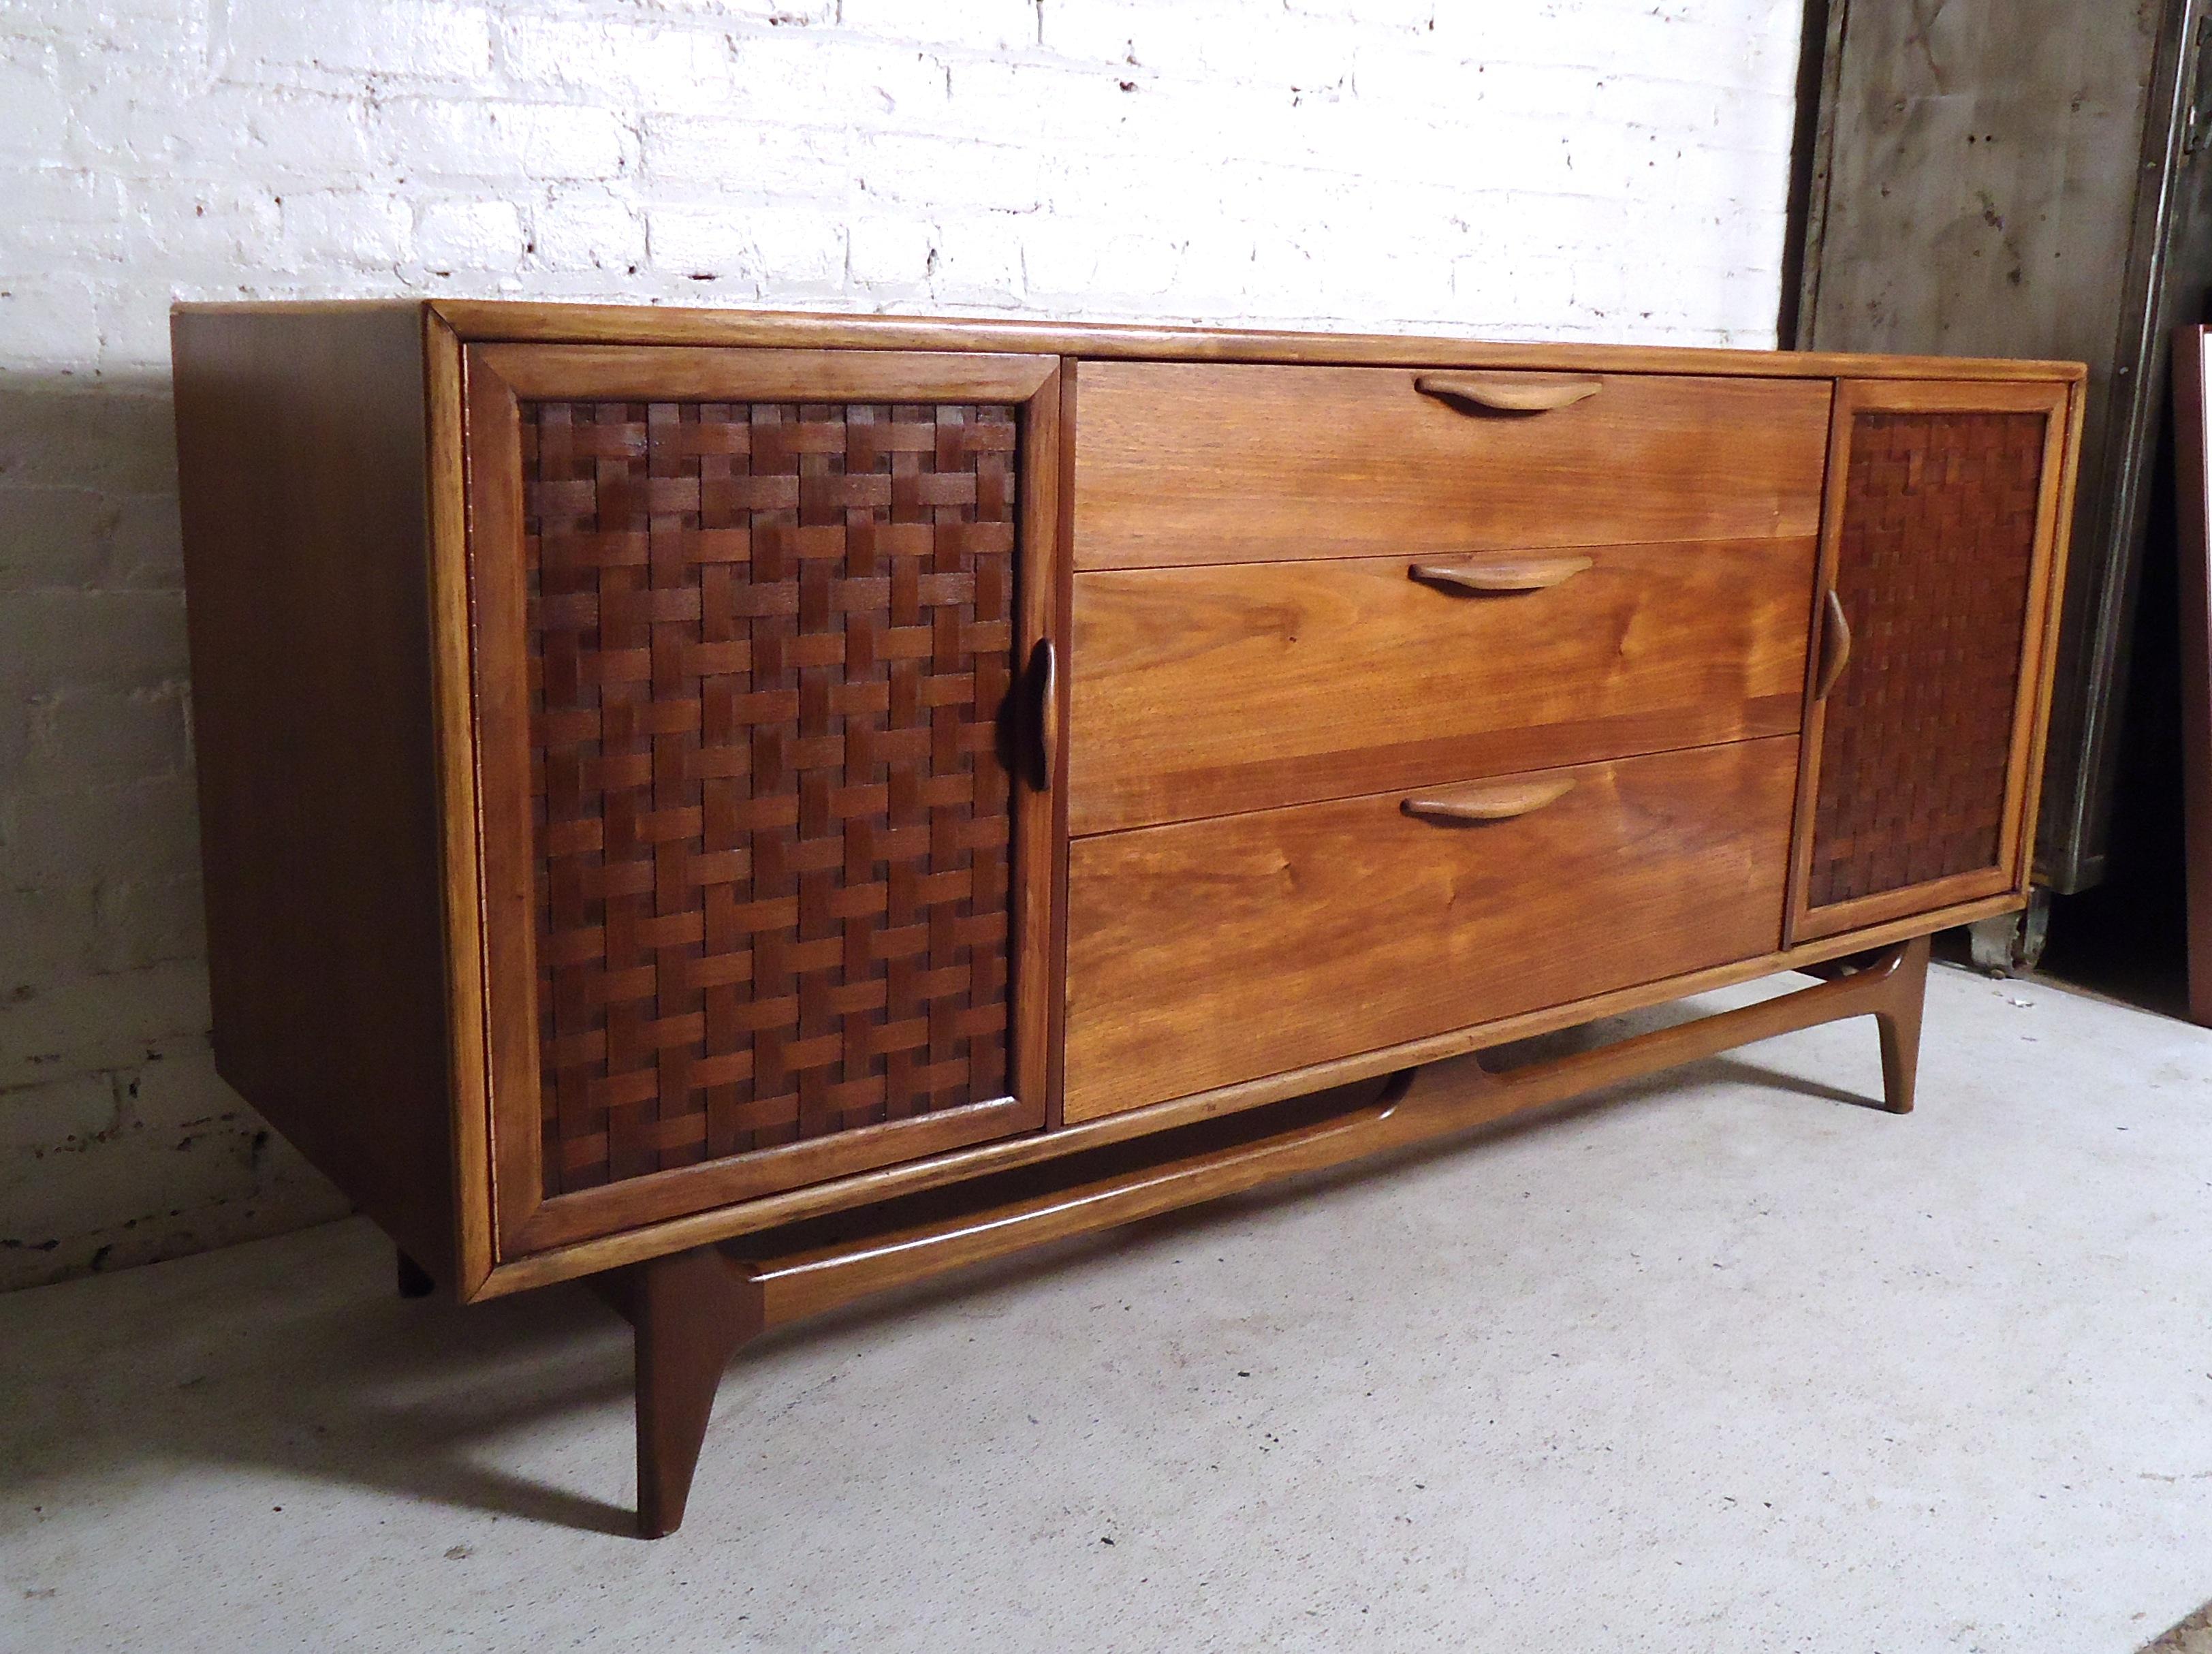 Gorgeous vintage modern credenza by Lane featuring basket woven doors covering a set of drawers on each side, nine drawers total. 
Please confirm item location (NY or NJ).